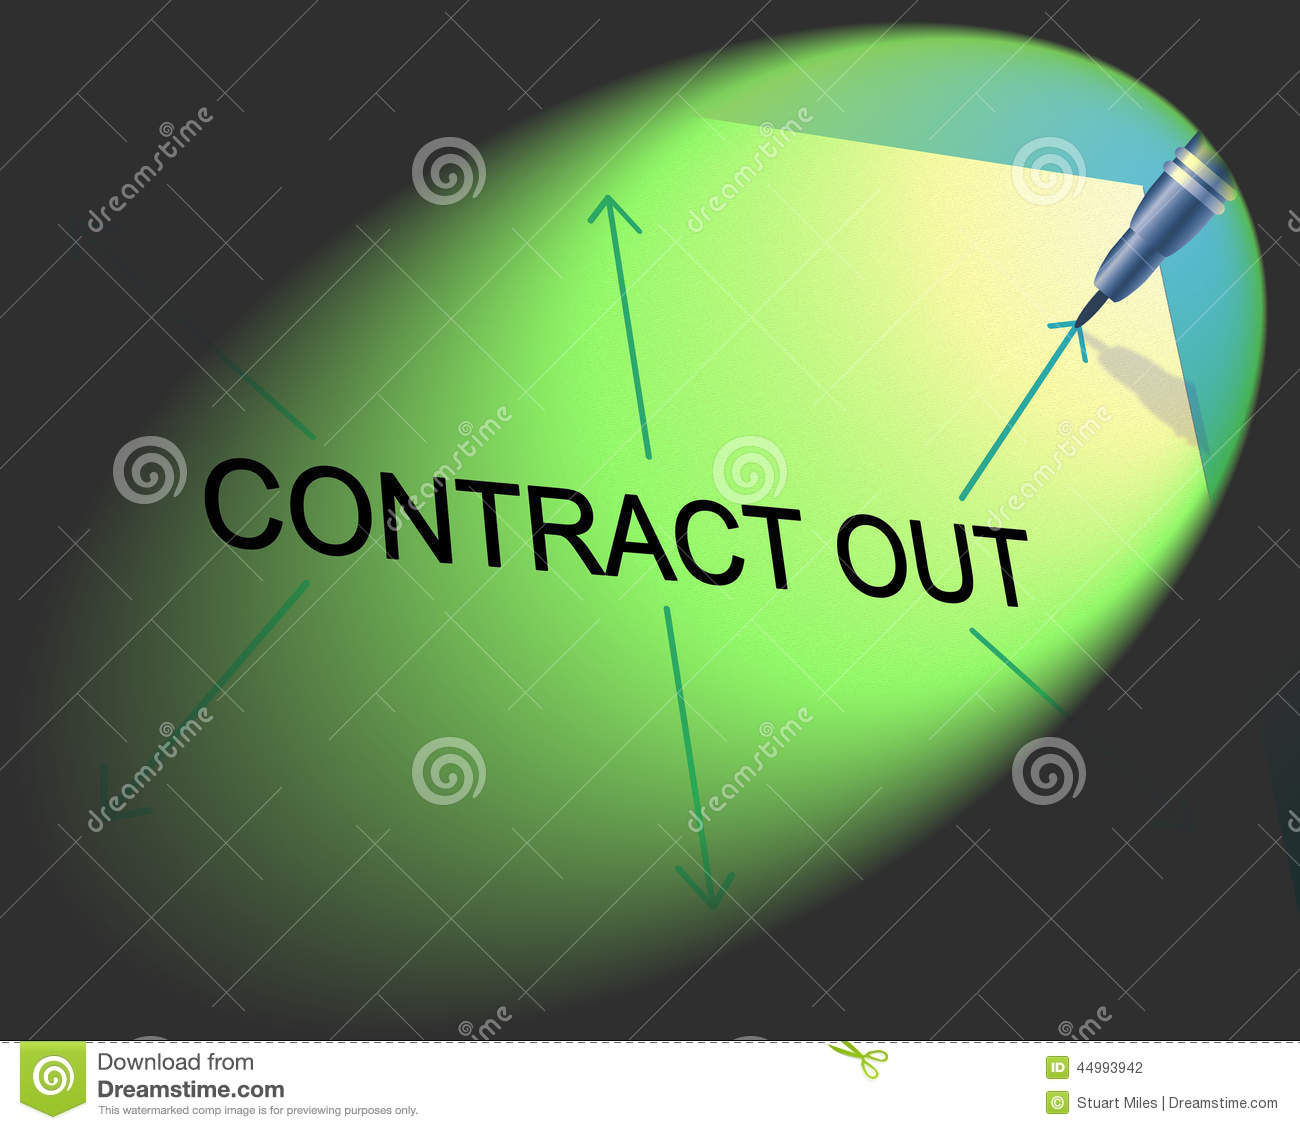 Contract Out Representing Independent Contractor And Subcontracting 